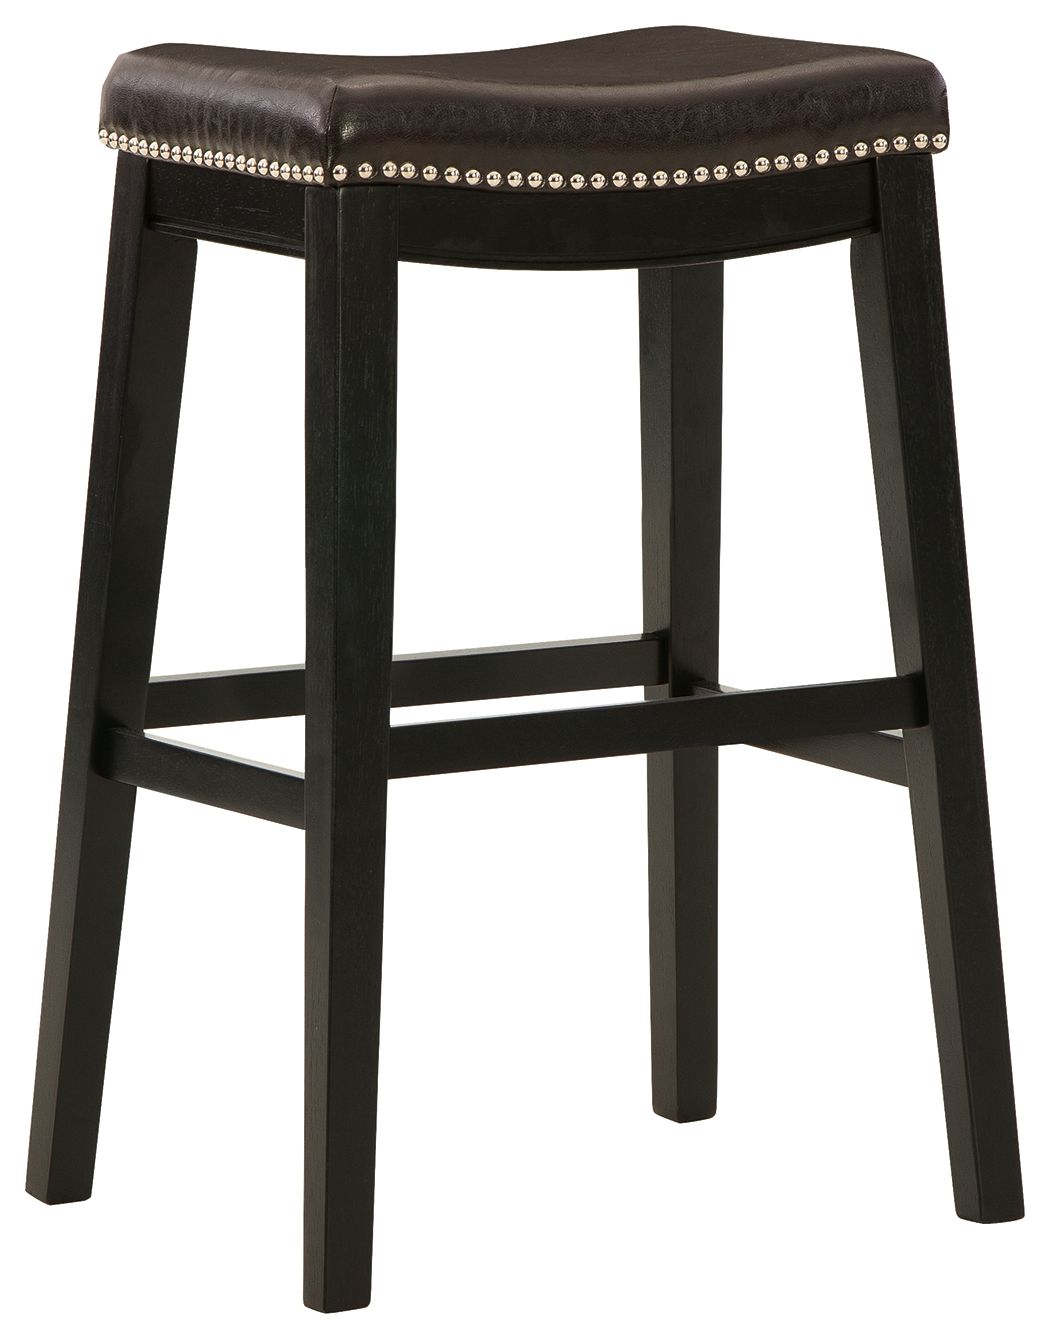 Lemante - Tall Upholstered Stool (Set of 2)